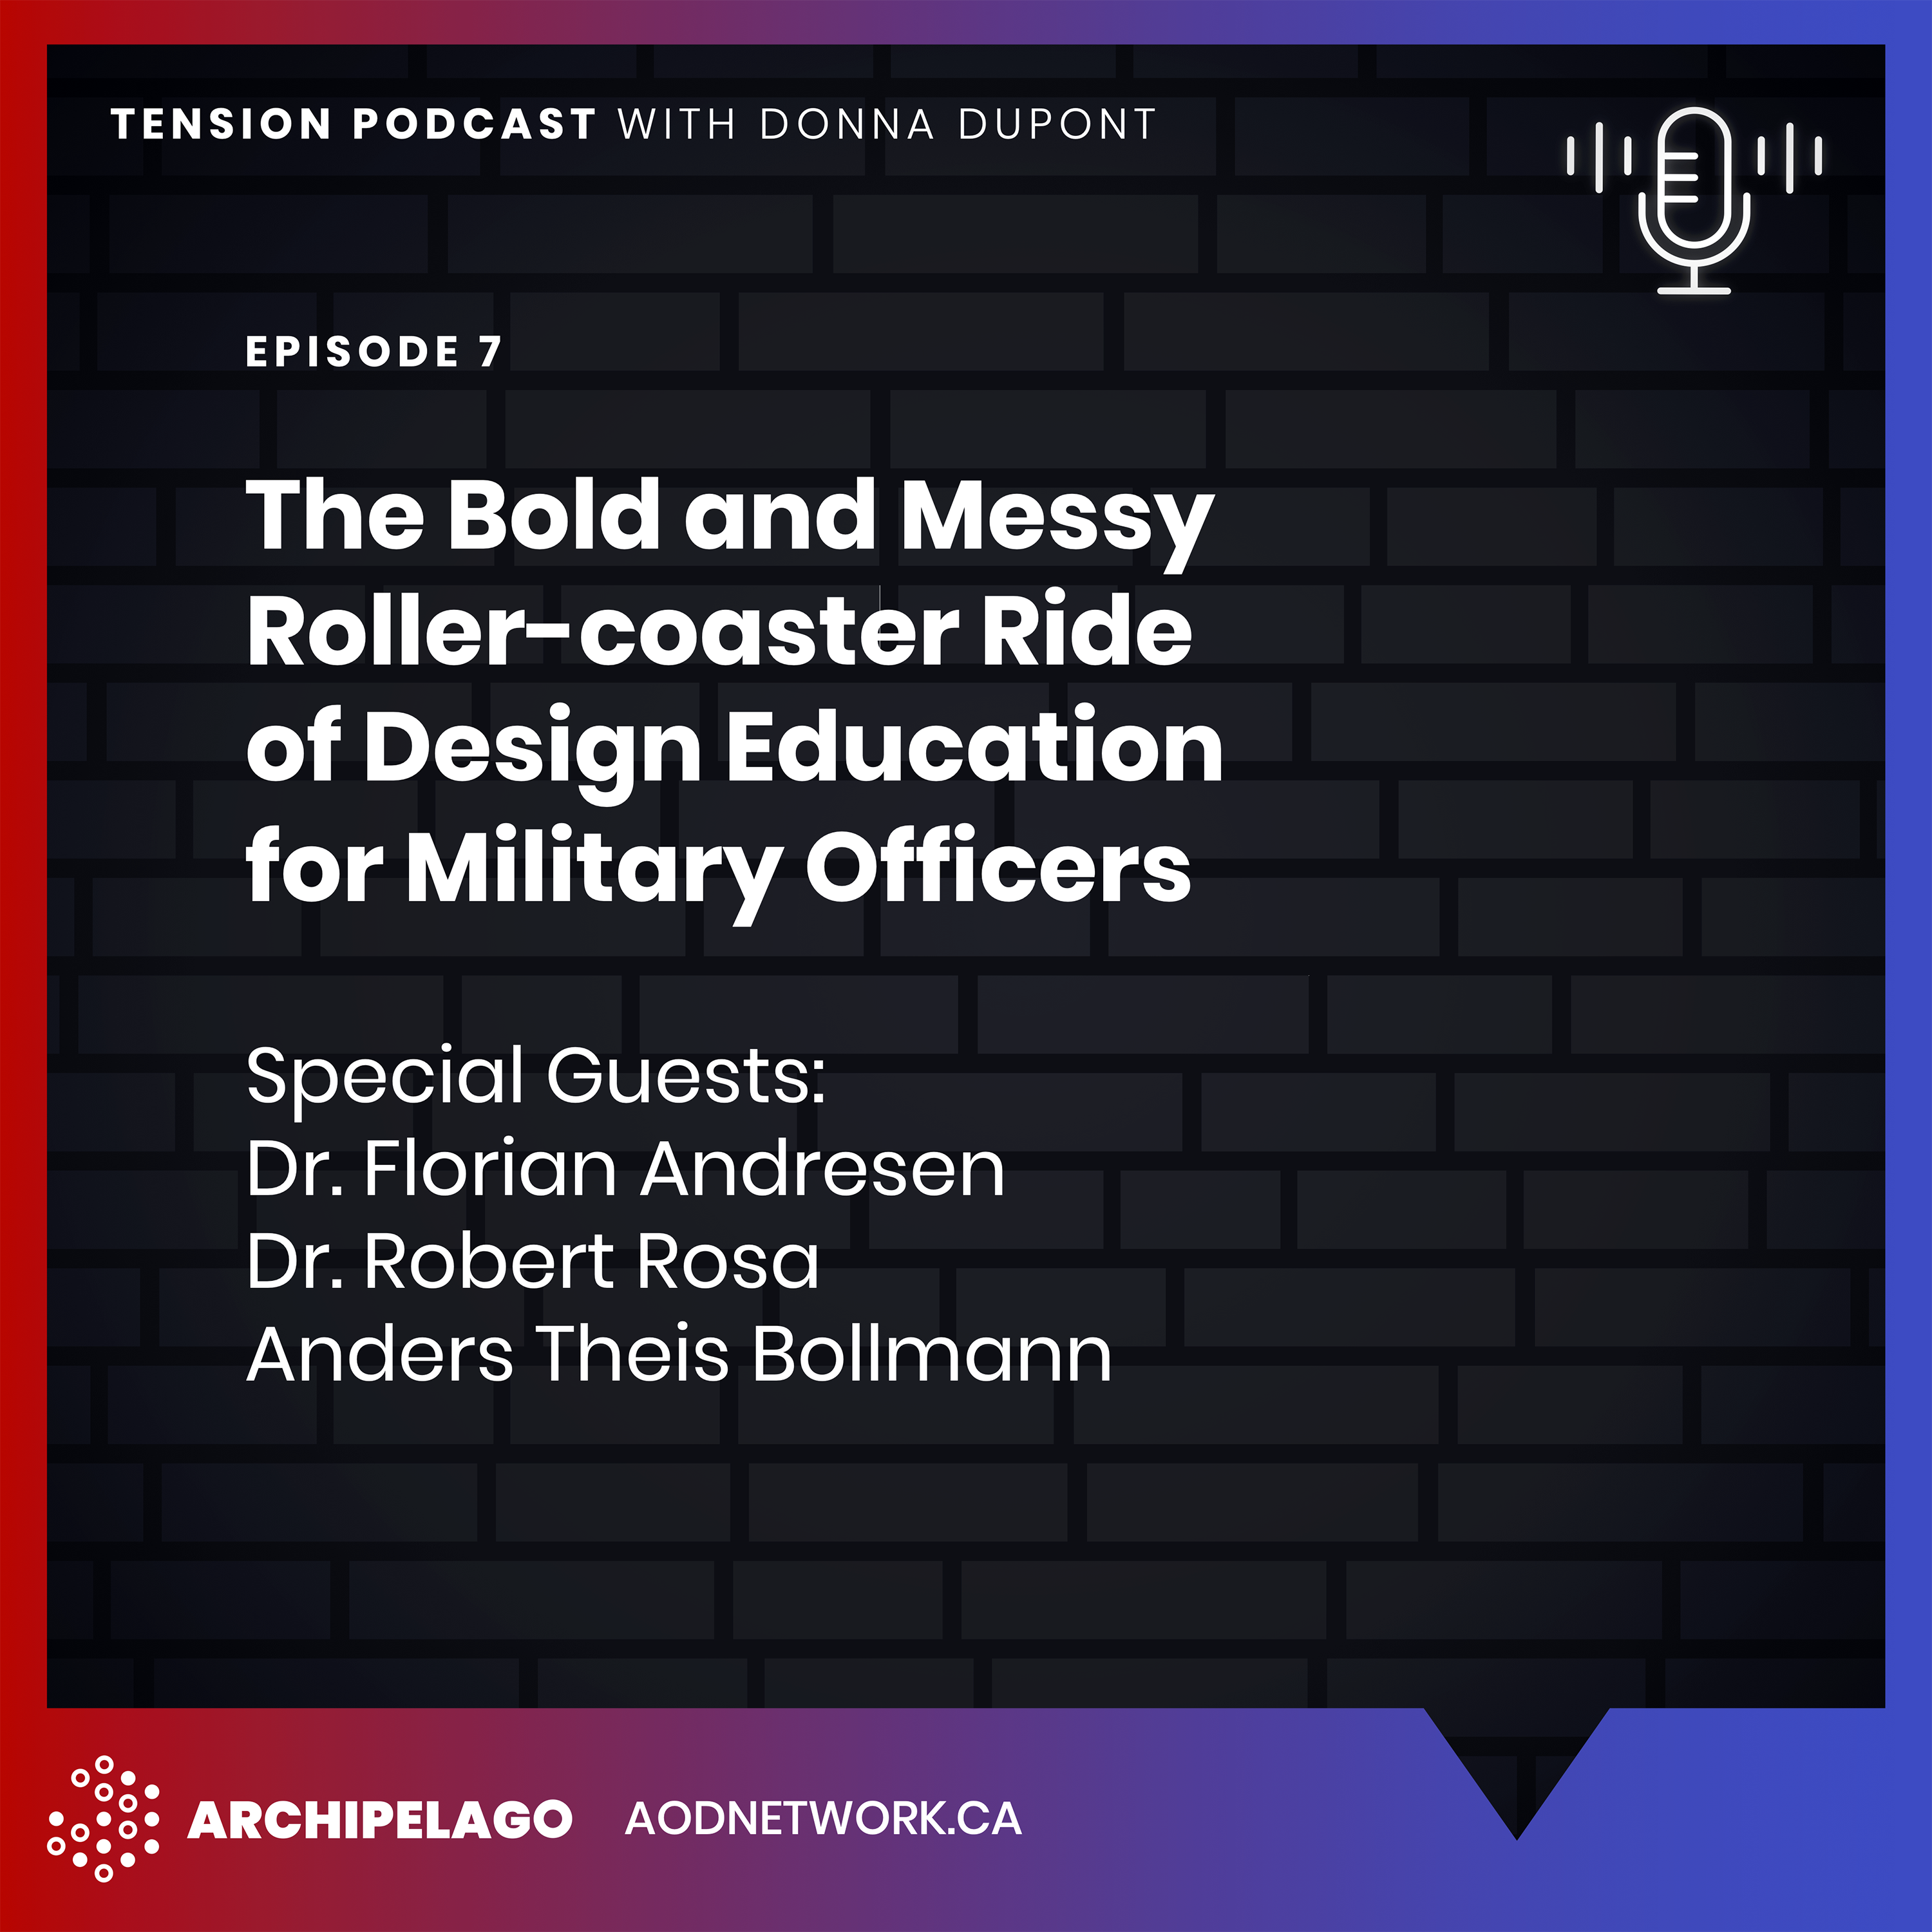 Ep. 7: The Bold and Messy Roller-coaster Ride of Design Education for Military Officers